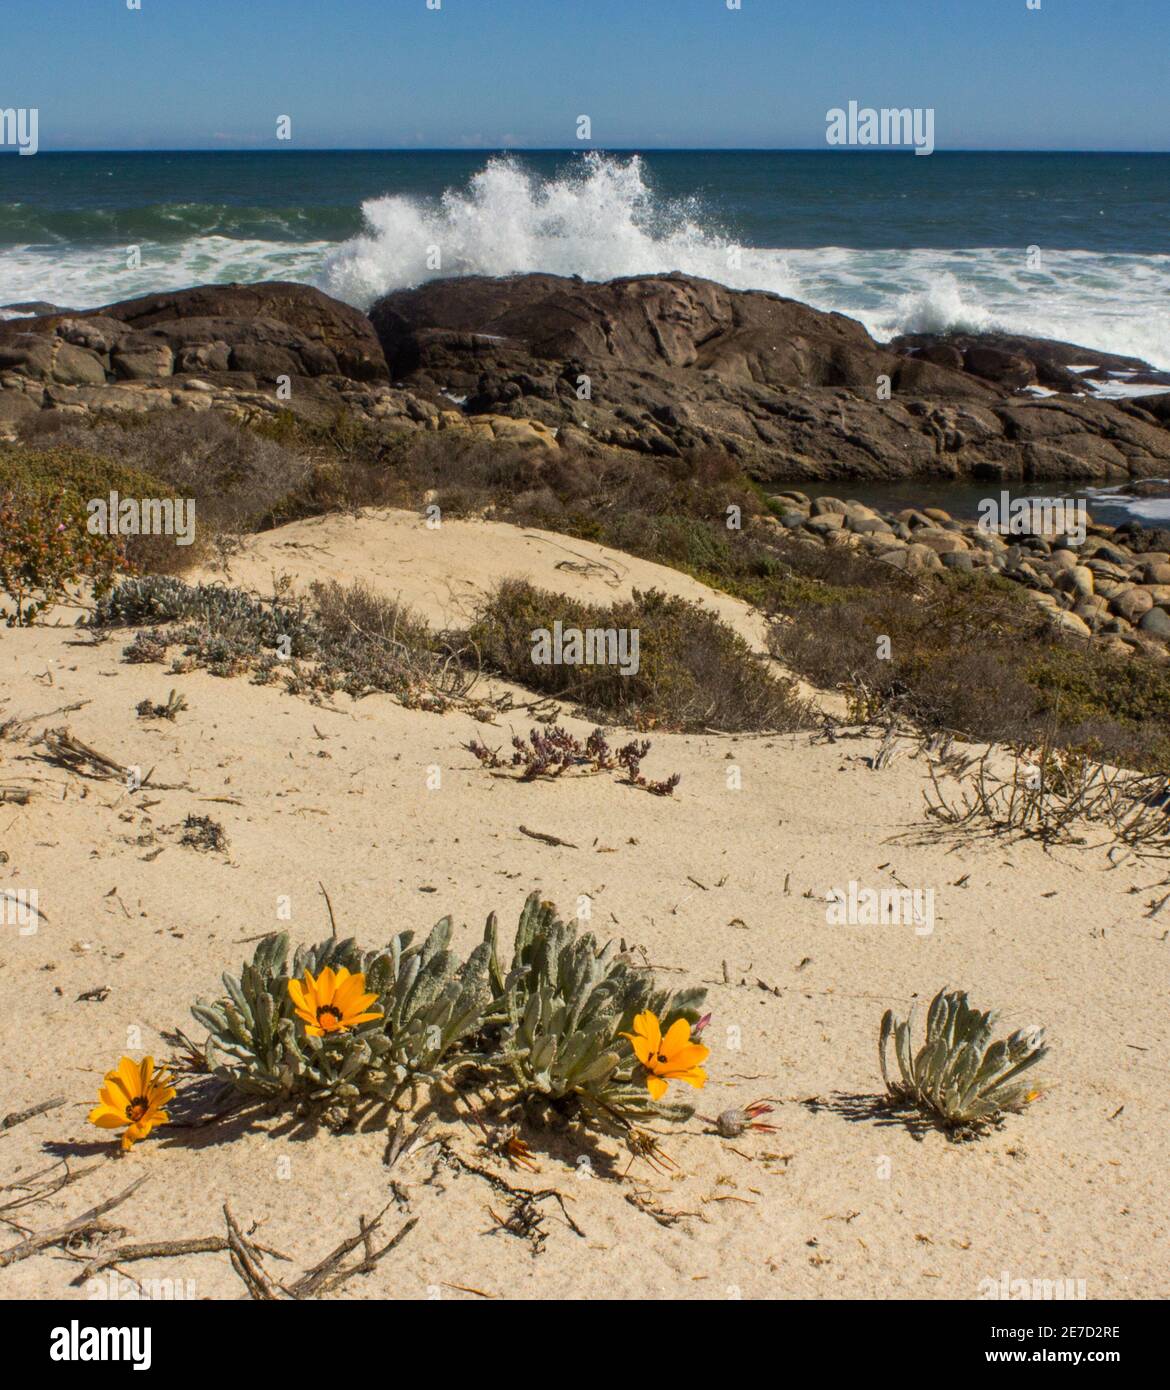 Gazania Splendidissima, in bloom on a sandy section of beach with waves breaking on the rocky shore in the Background, in the Namaqua National Park Stock Photo